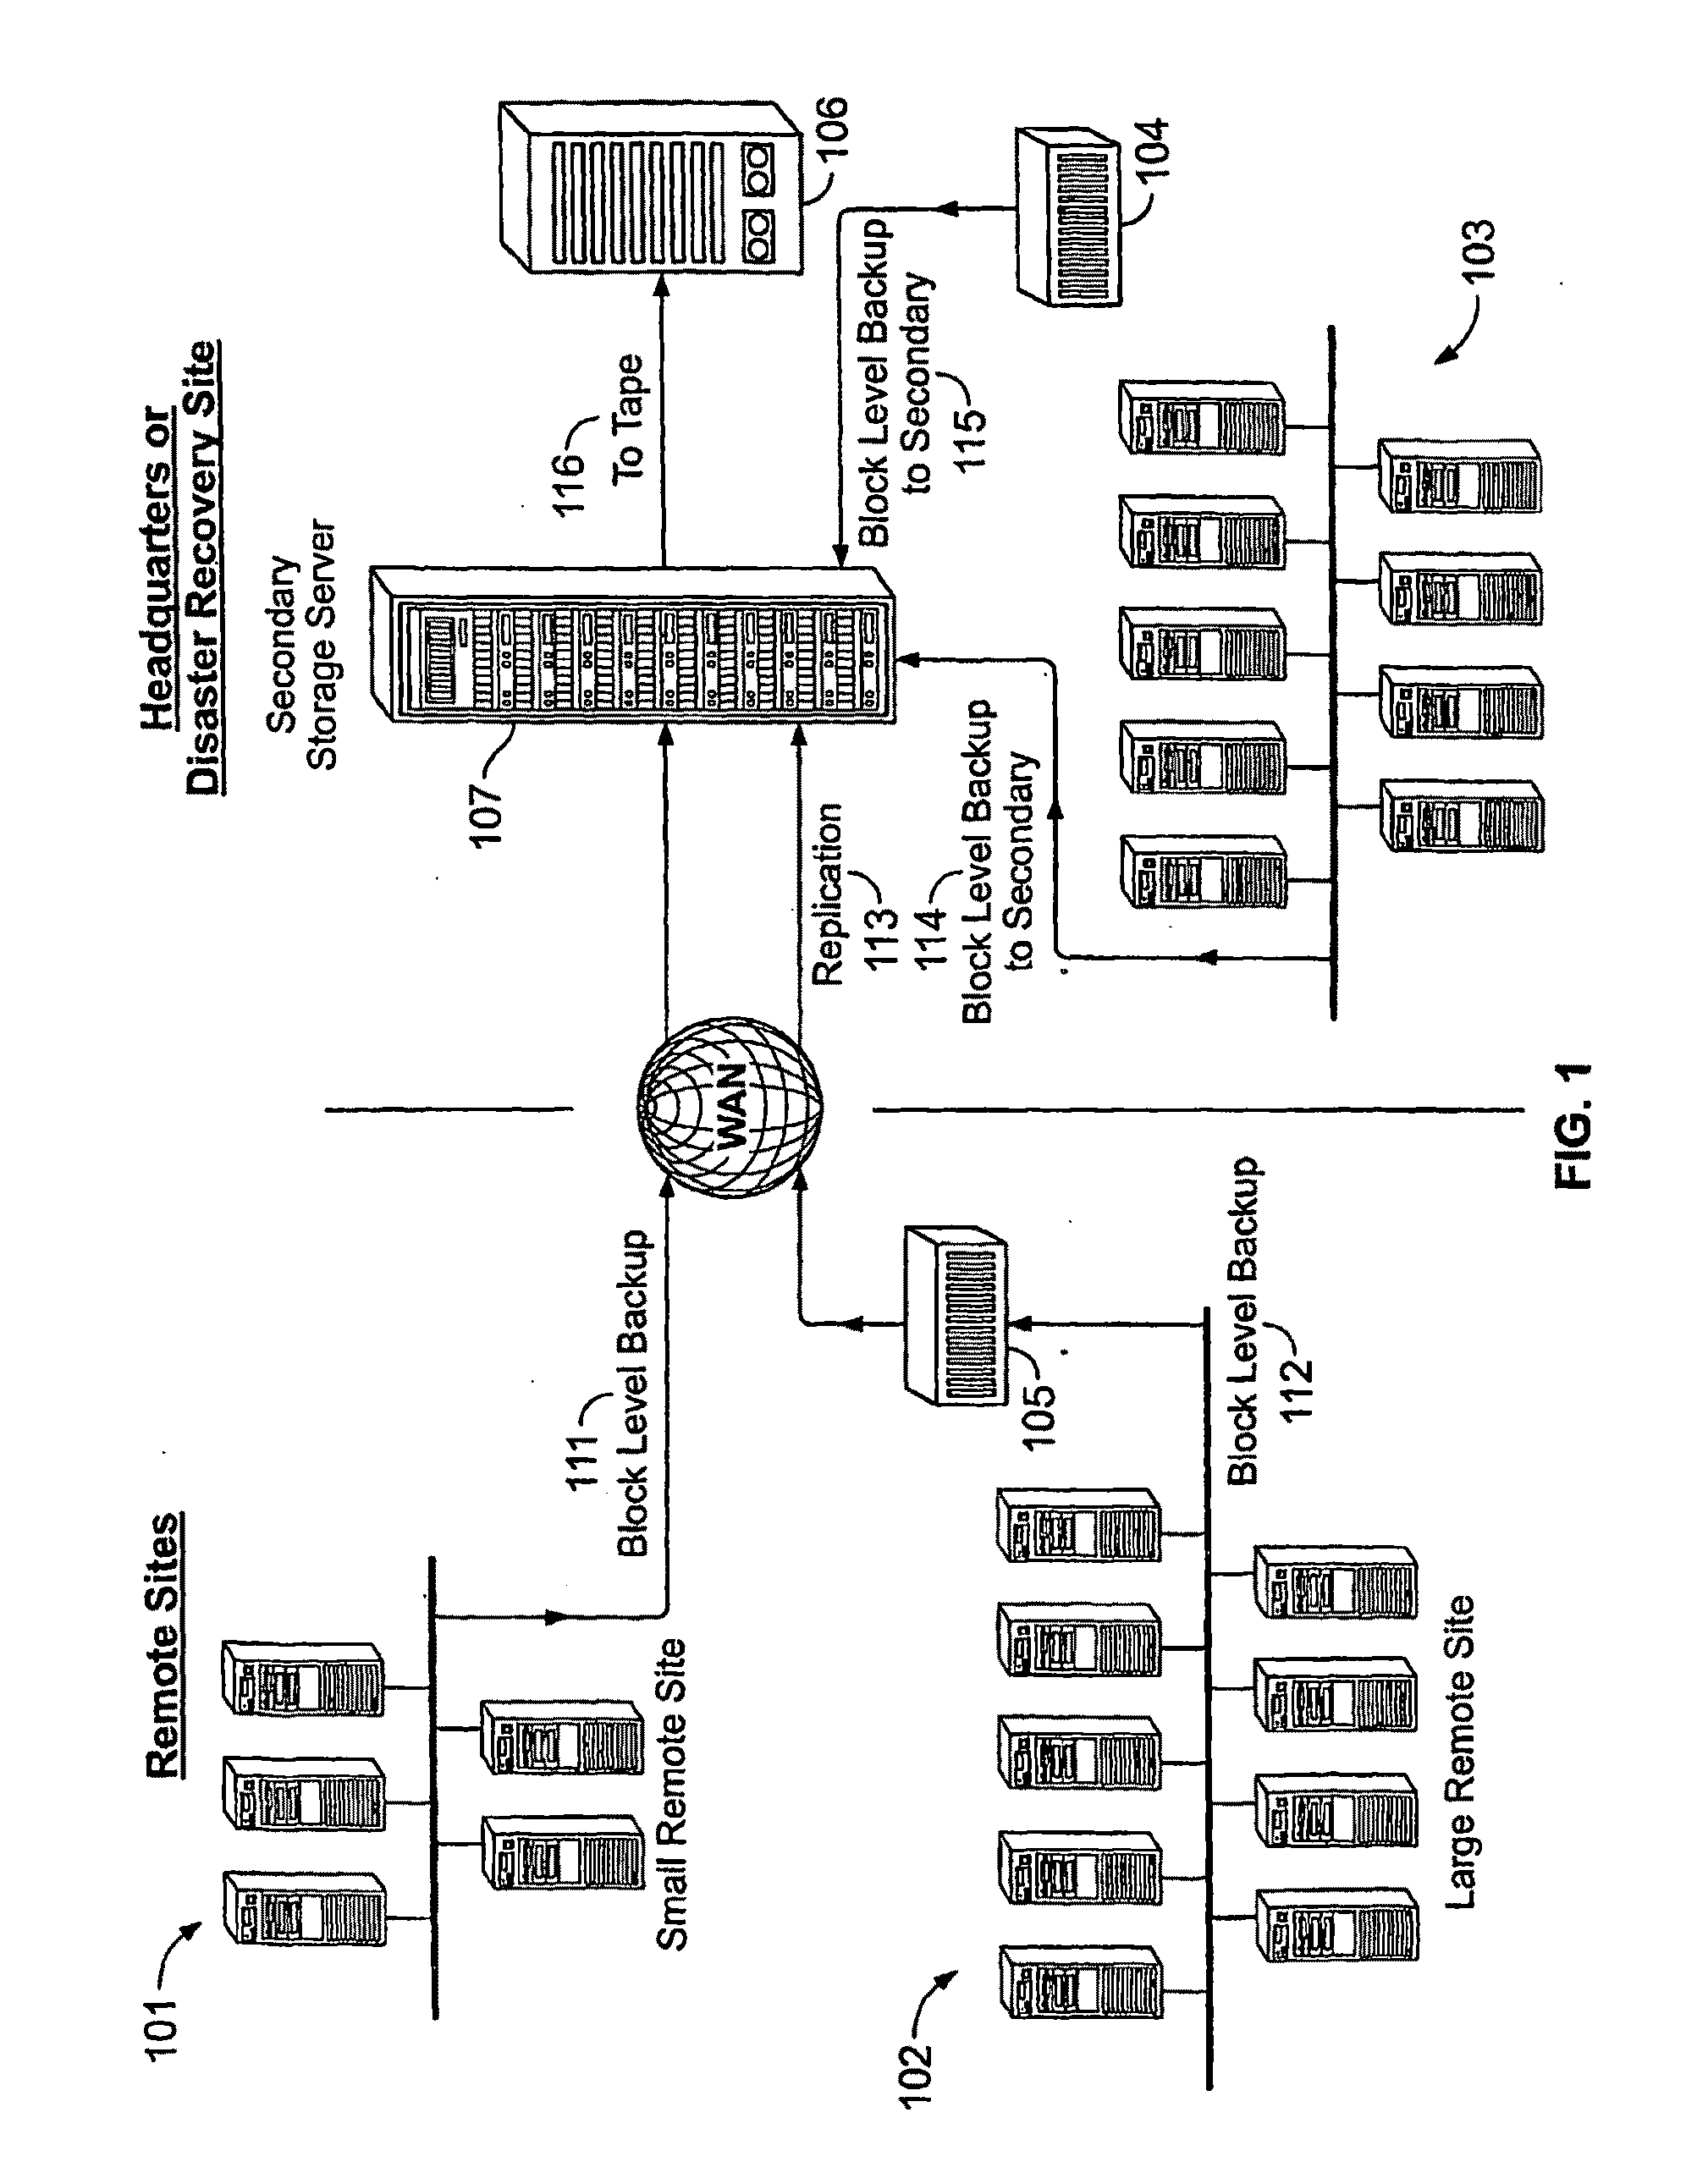 System And Method for High Performance Enterprise Data Protection